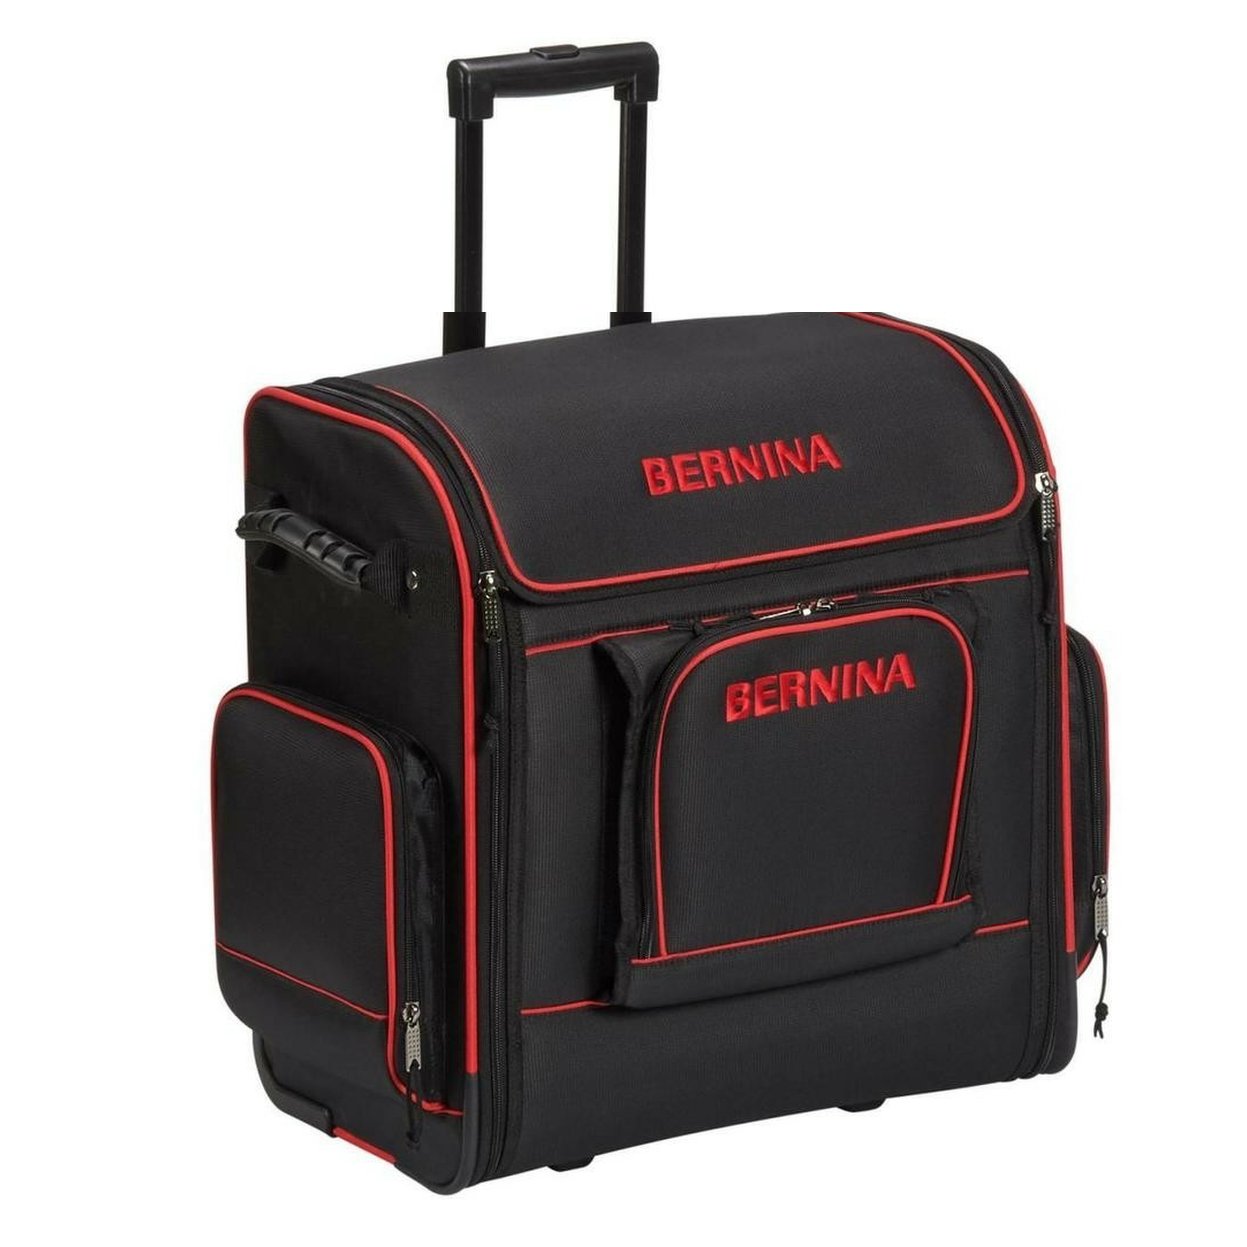 Bernina Sewing Machine Trolley Case from Jaycotts Sewing Supplies